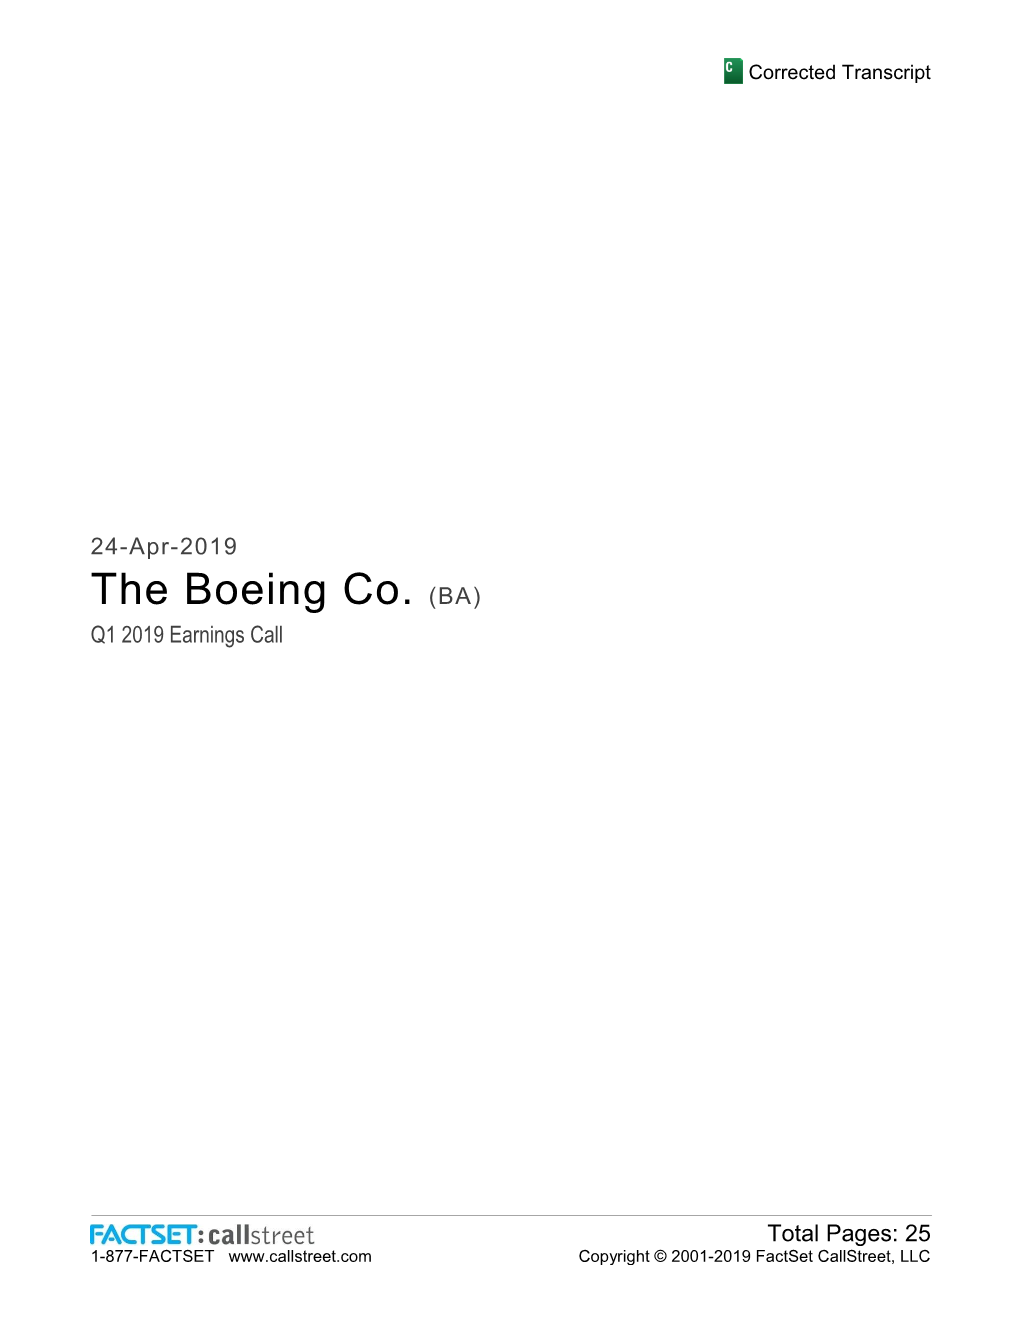 The Boeing Co. (BA) Q1 2019 Earnings Call